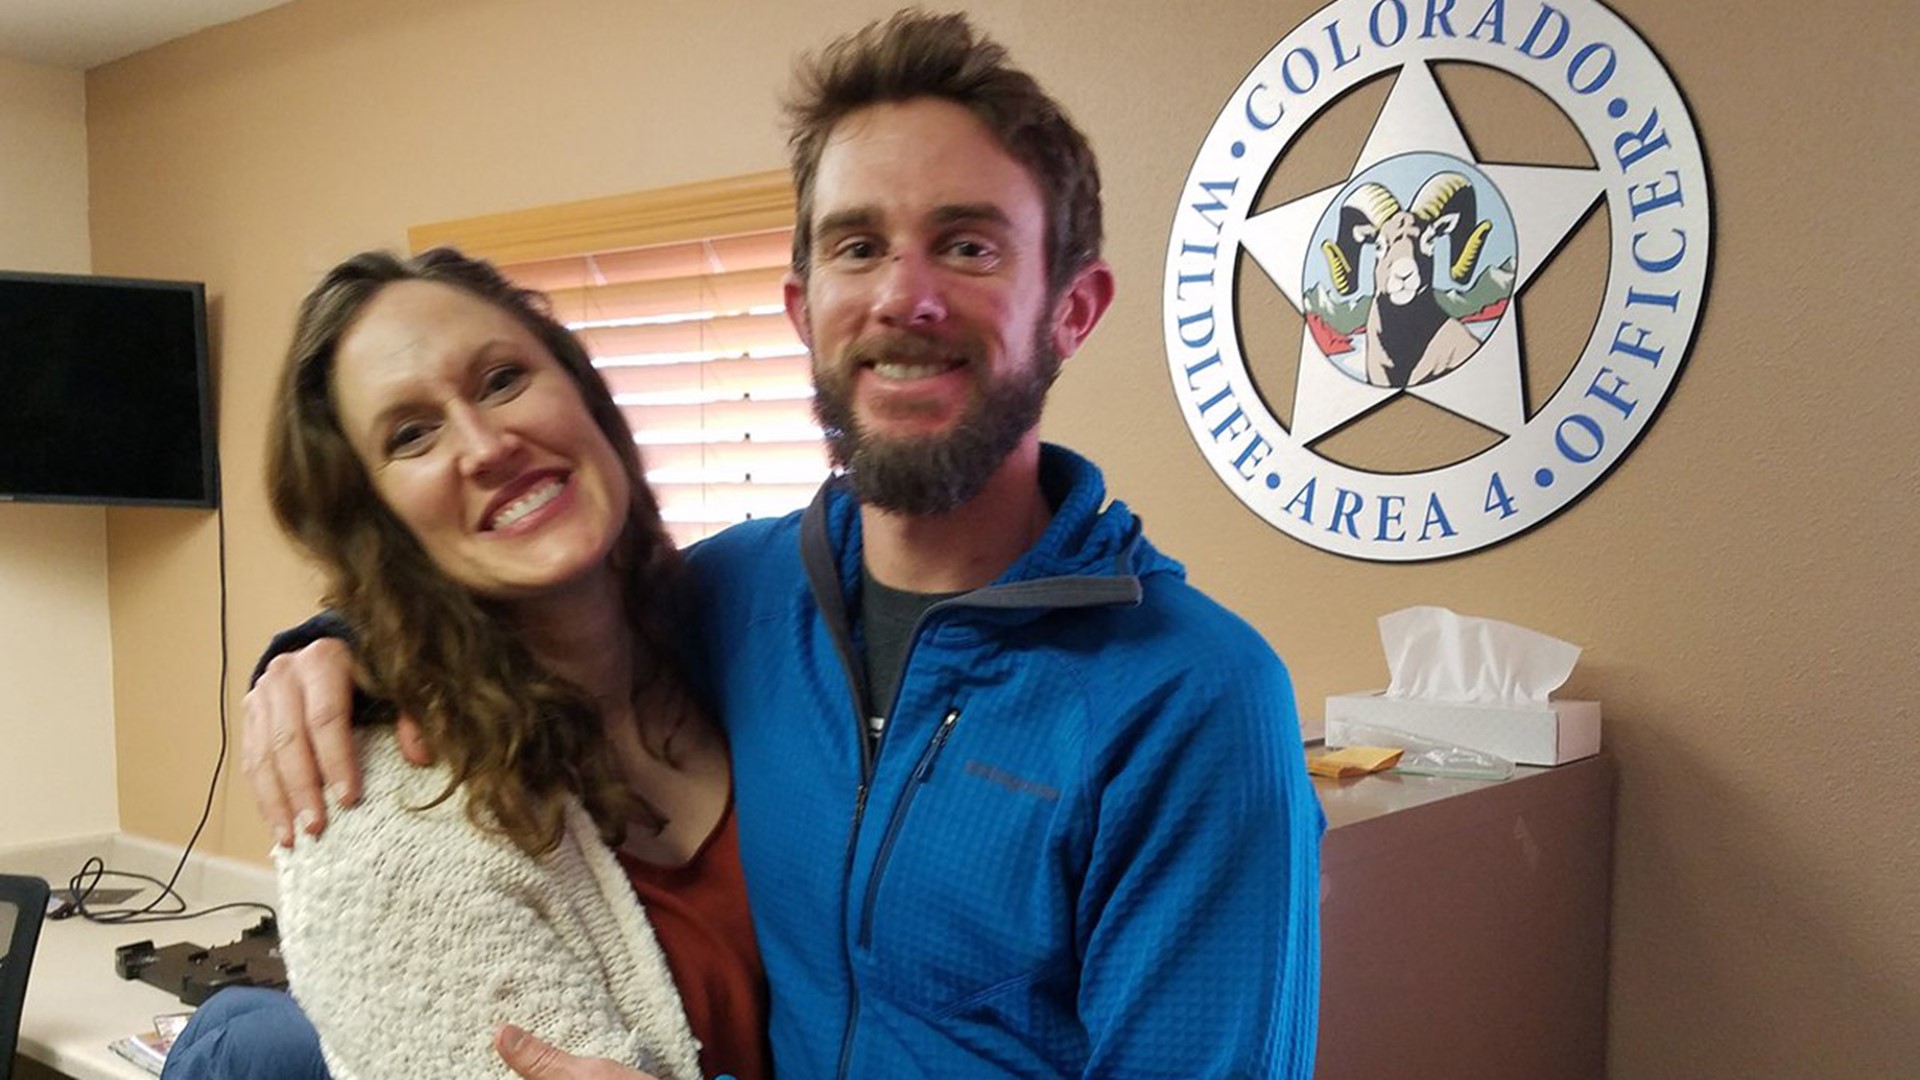 The man who killed a mountain lion with his bare hands after he was attacked during a jog in a popular Colorado open space spoke to the media Thursday.